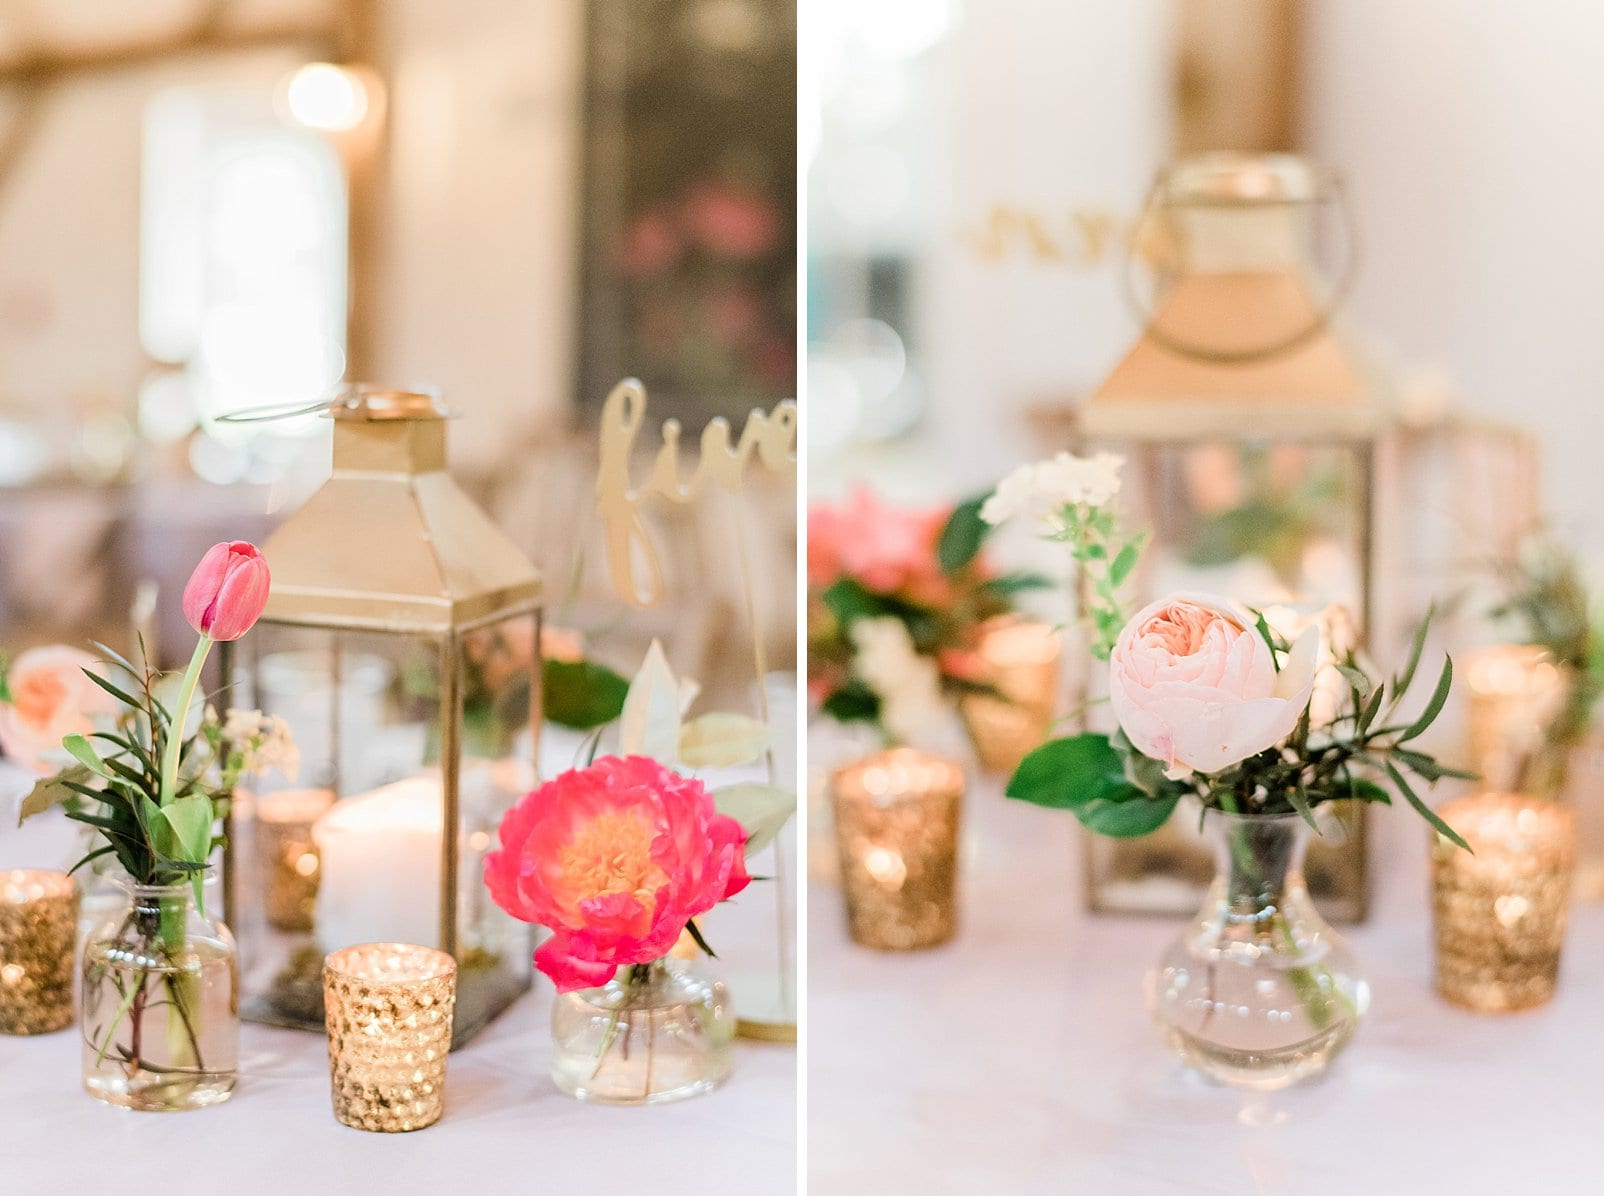 chapel hill, nc reception table with fresh flowers and gold lanterns photo